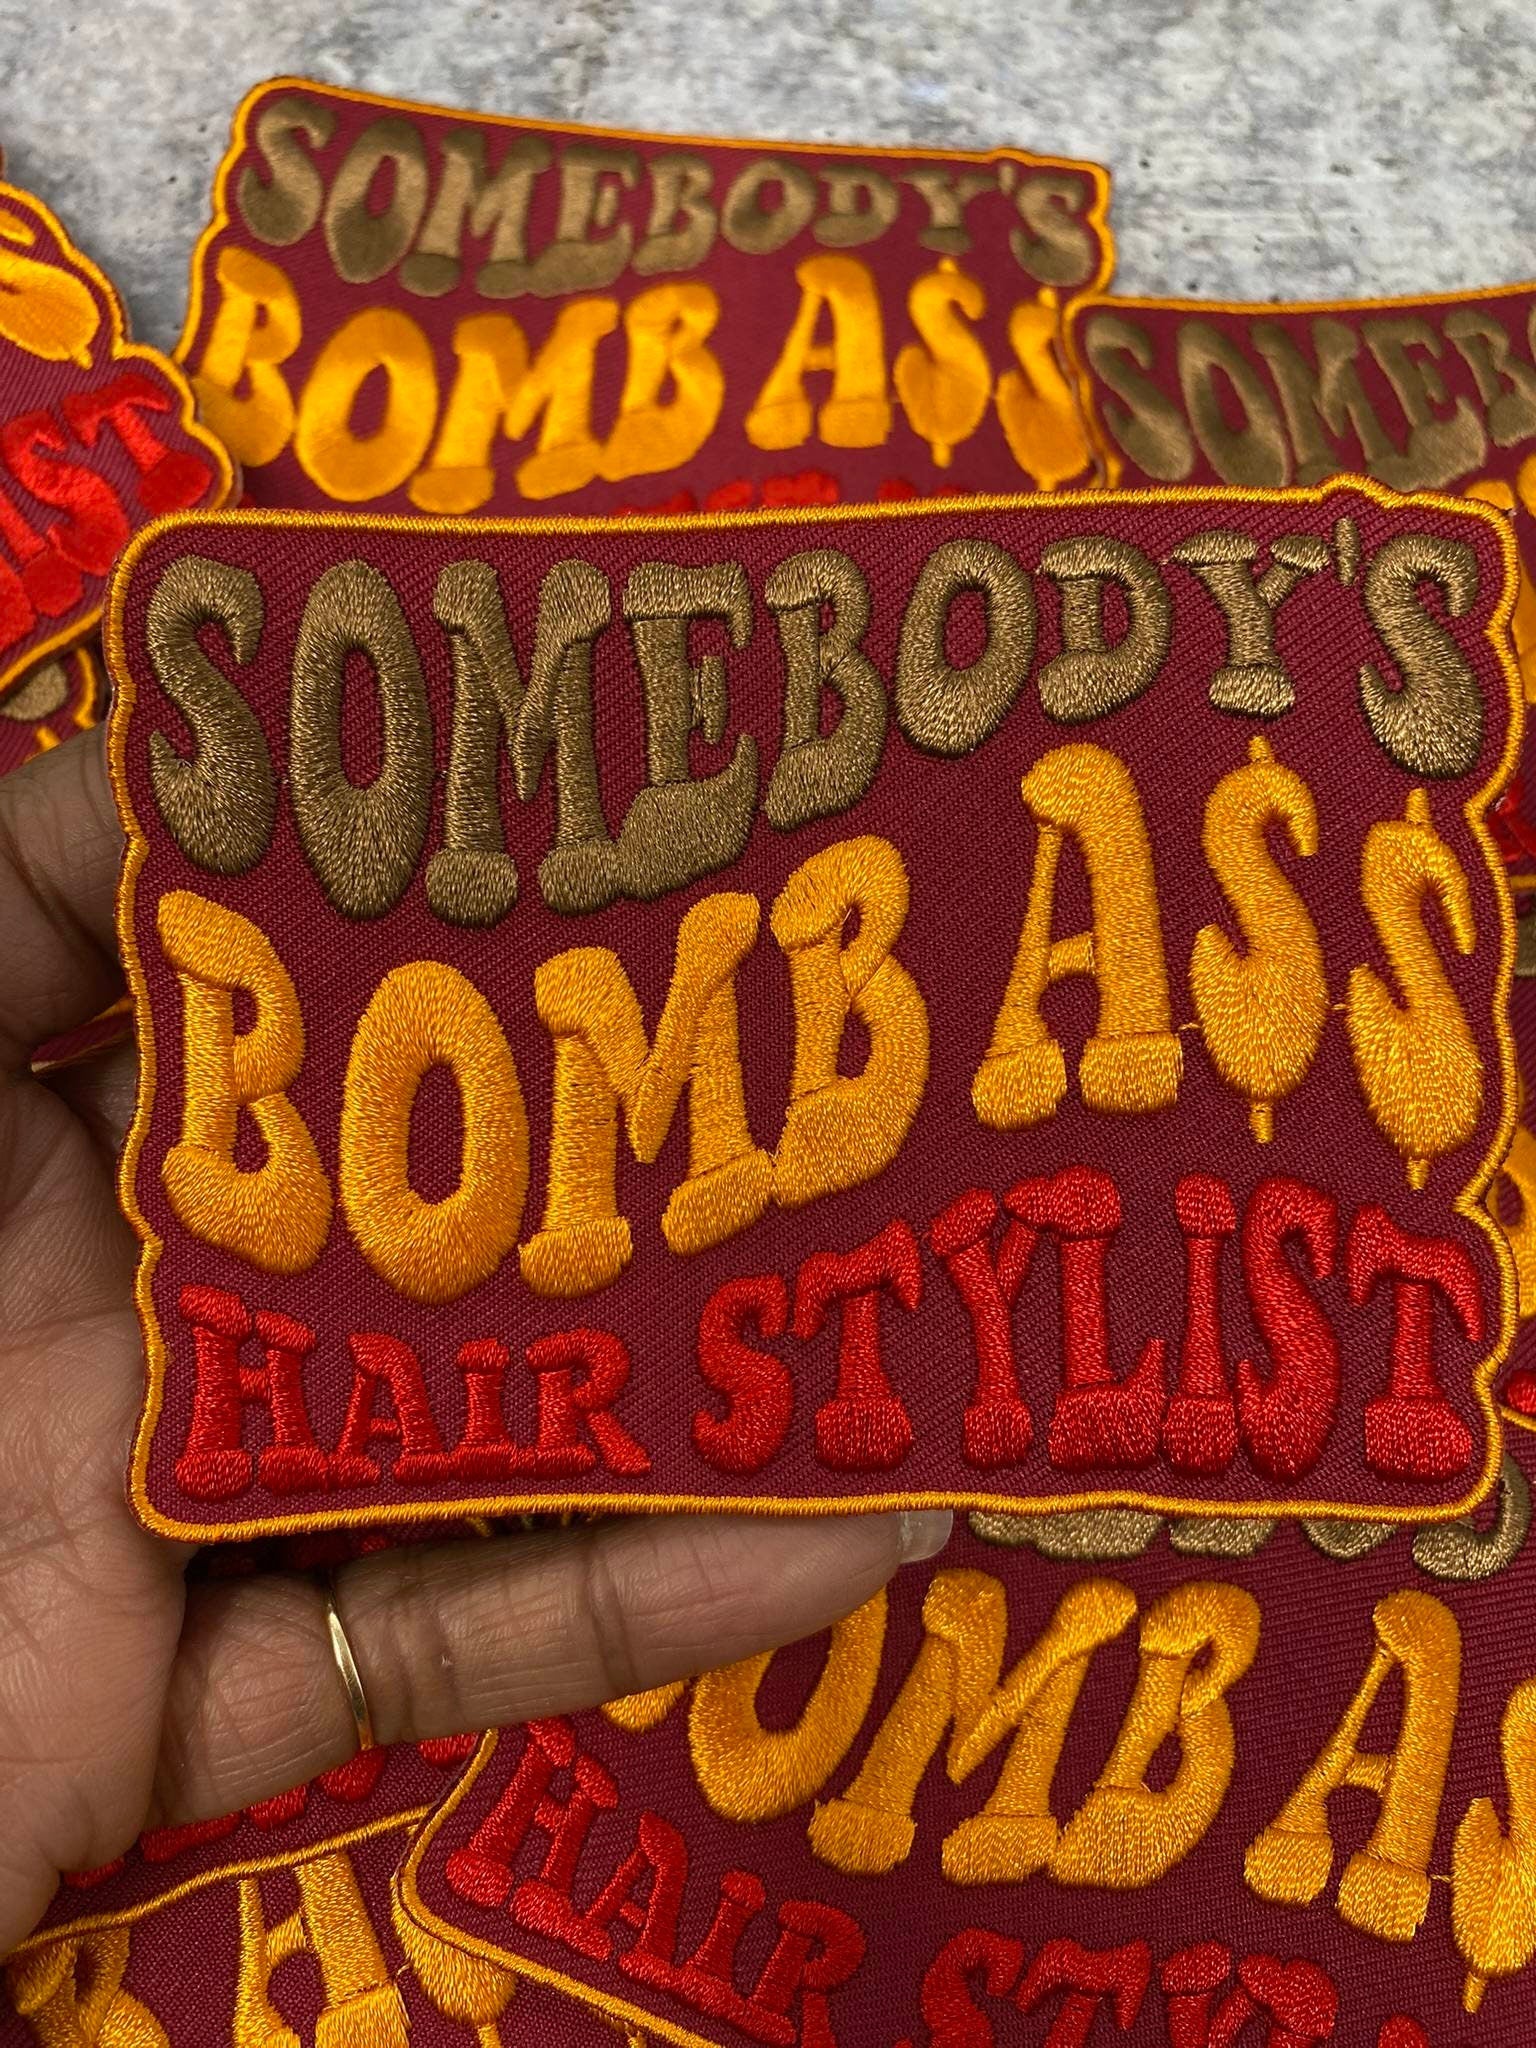 New, "Somebody's Bomb Ass HAIR STYLIST" 1-pc, Iron-on Embroidered Patch, Cute Patch for Jackets, Hats, Crocs, Gifts for Stylist, Funny Gifts